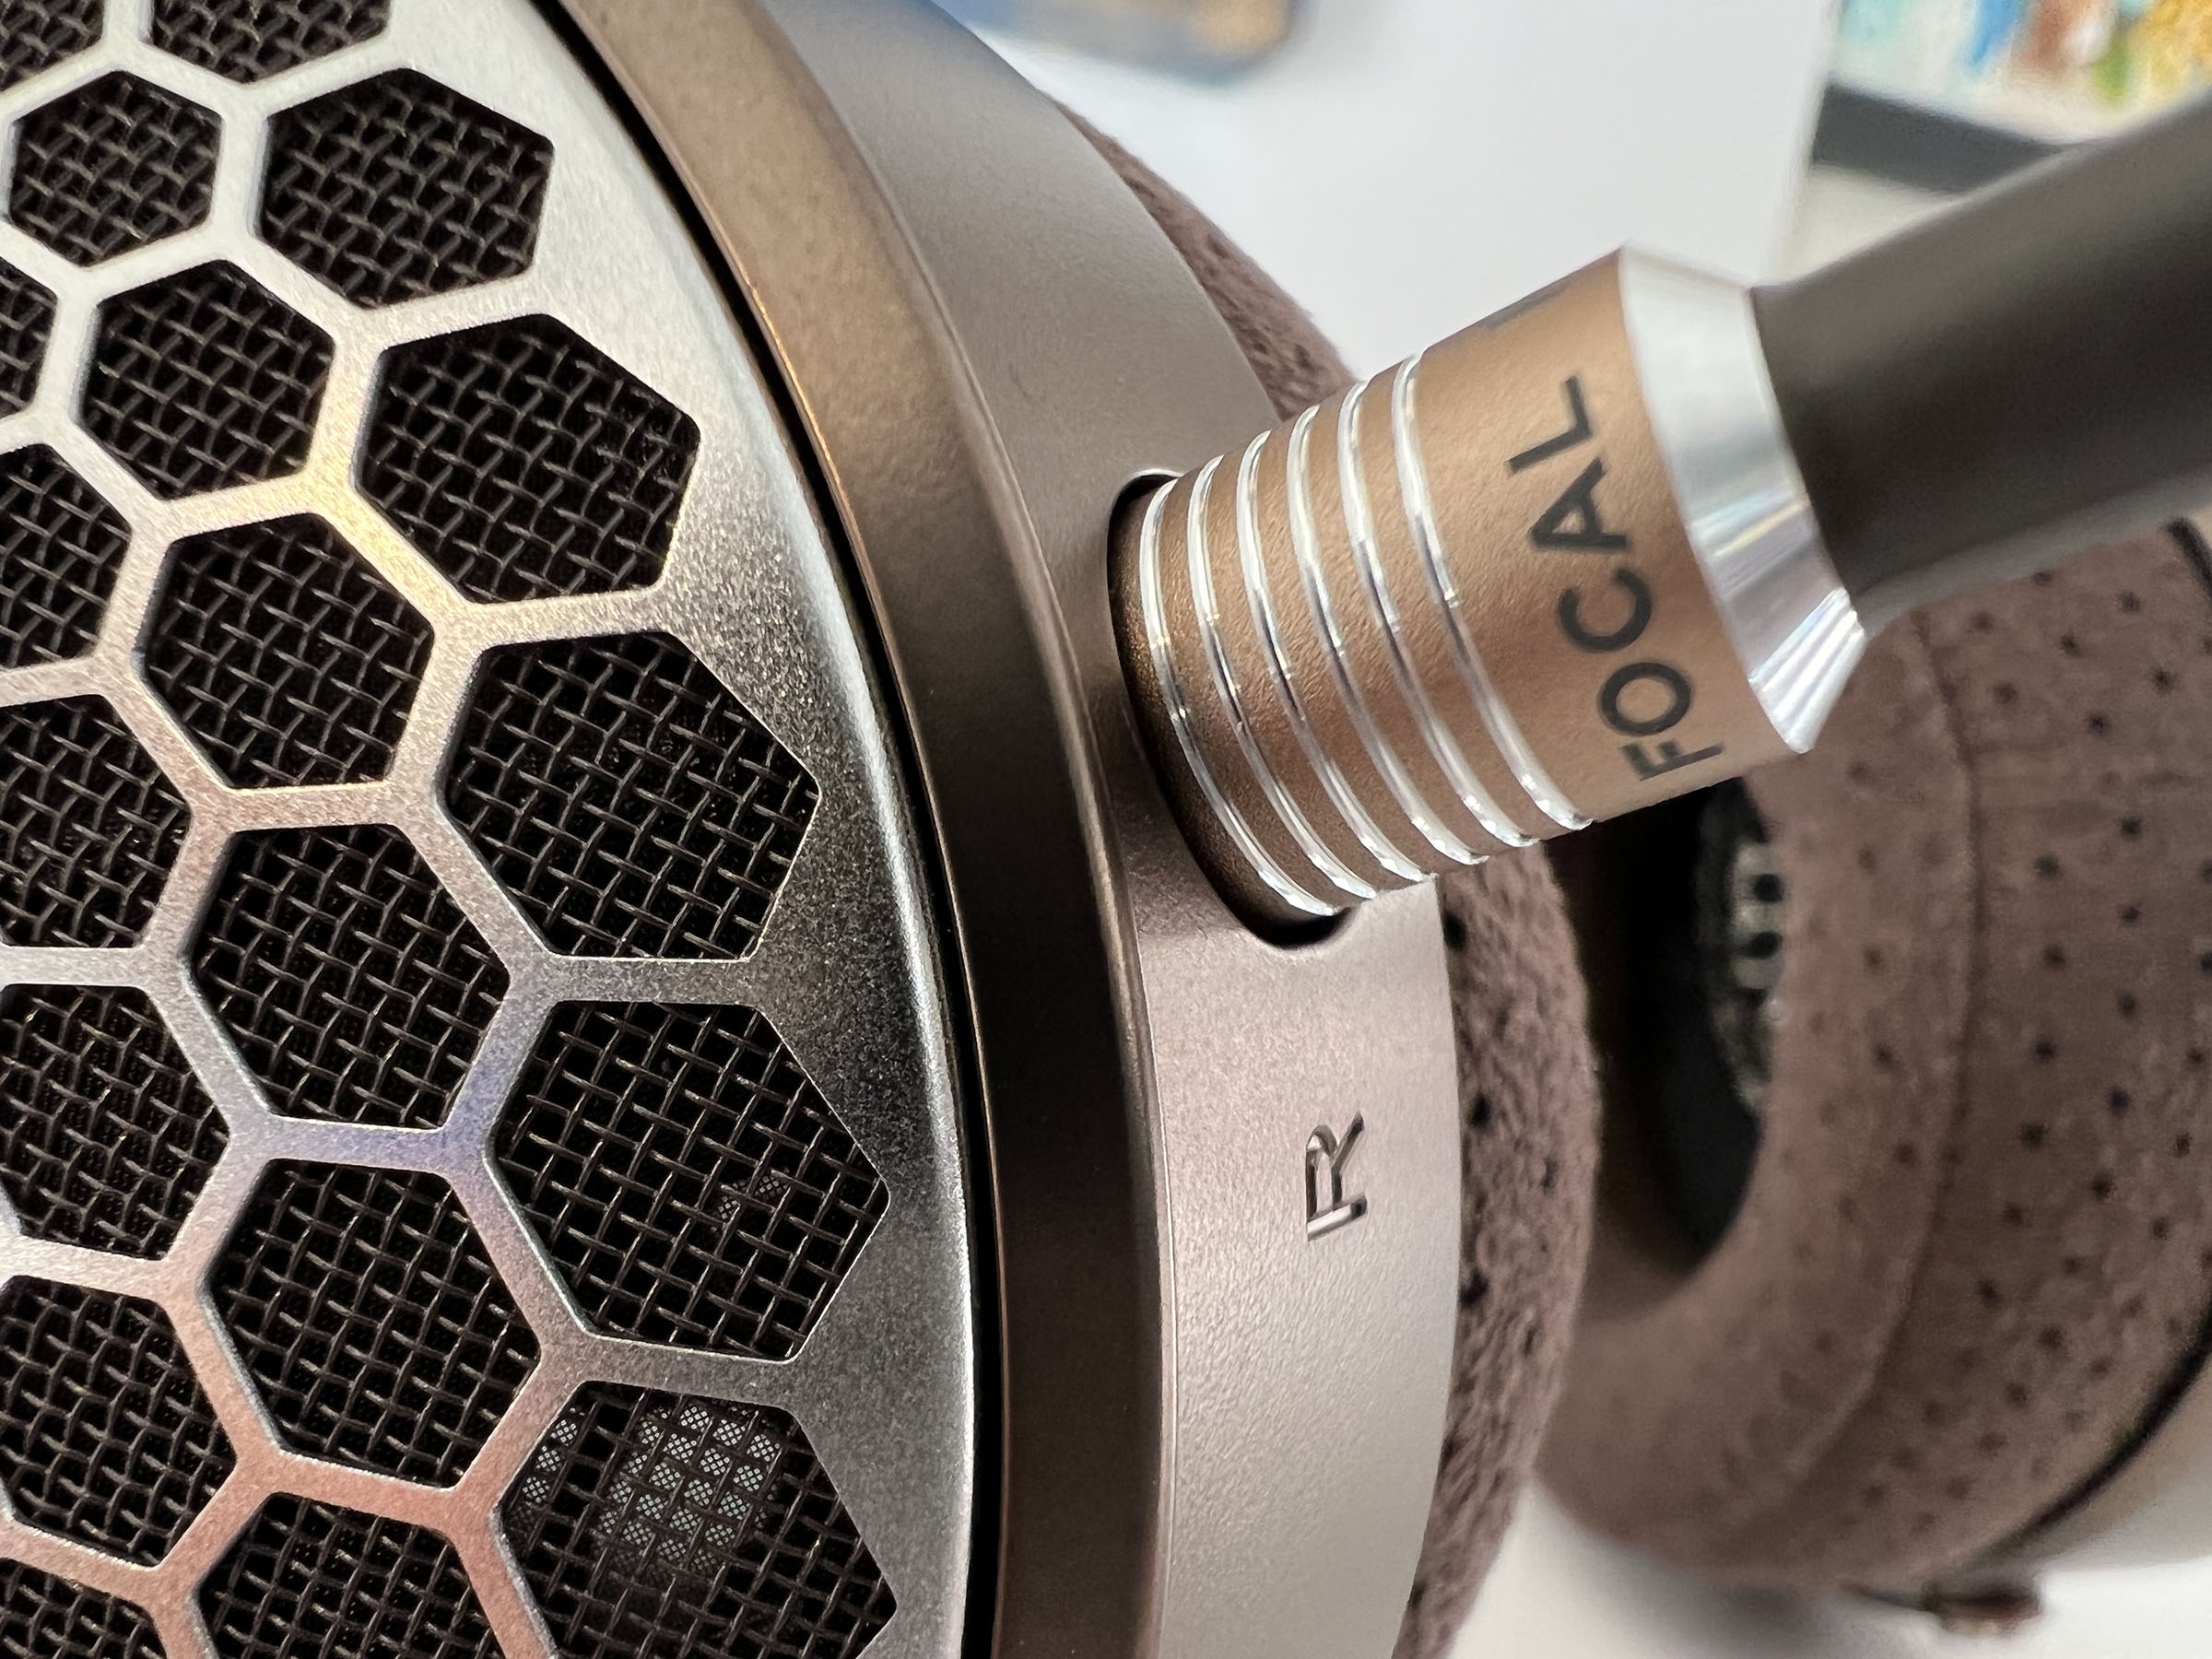 These are beautiful headphones that make the most of just about any source, from a smartphone to a dedicated high-end integrated DAC/amp like Naim's Uniti Atom Headphone Edition. headphones e02f3973 img 0424